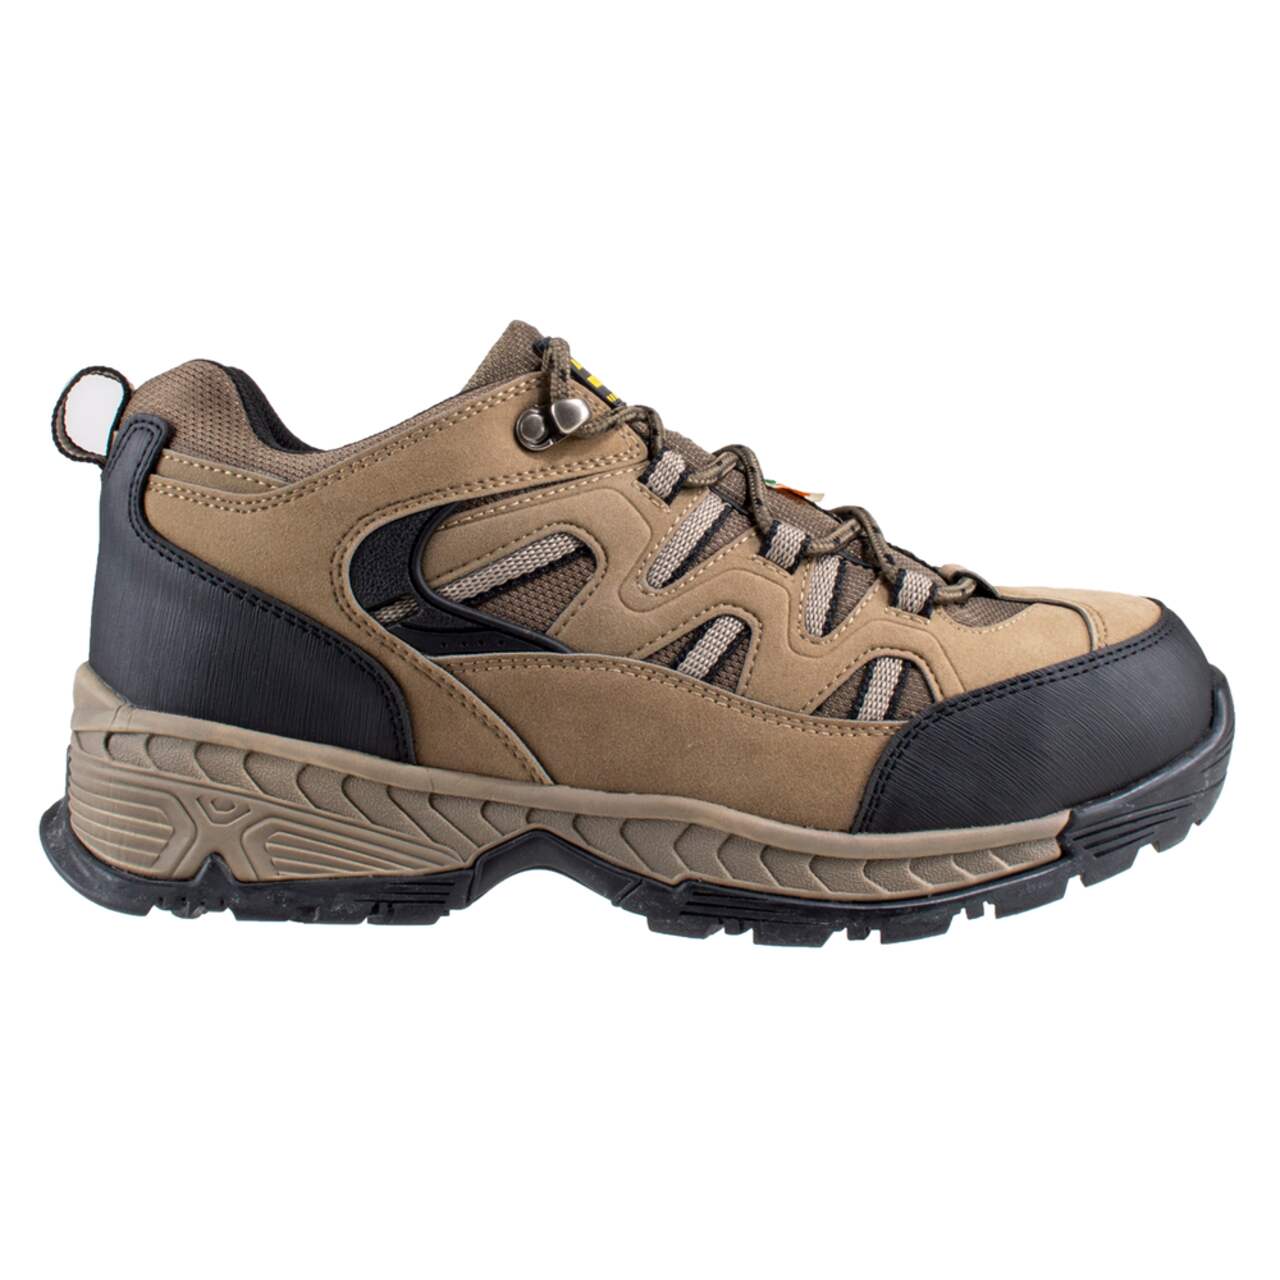 Altra Shield Men's CSA Low-Cut Steel Toe Safety Hiking Shoes, Heel and Toe  Guards, Brown